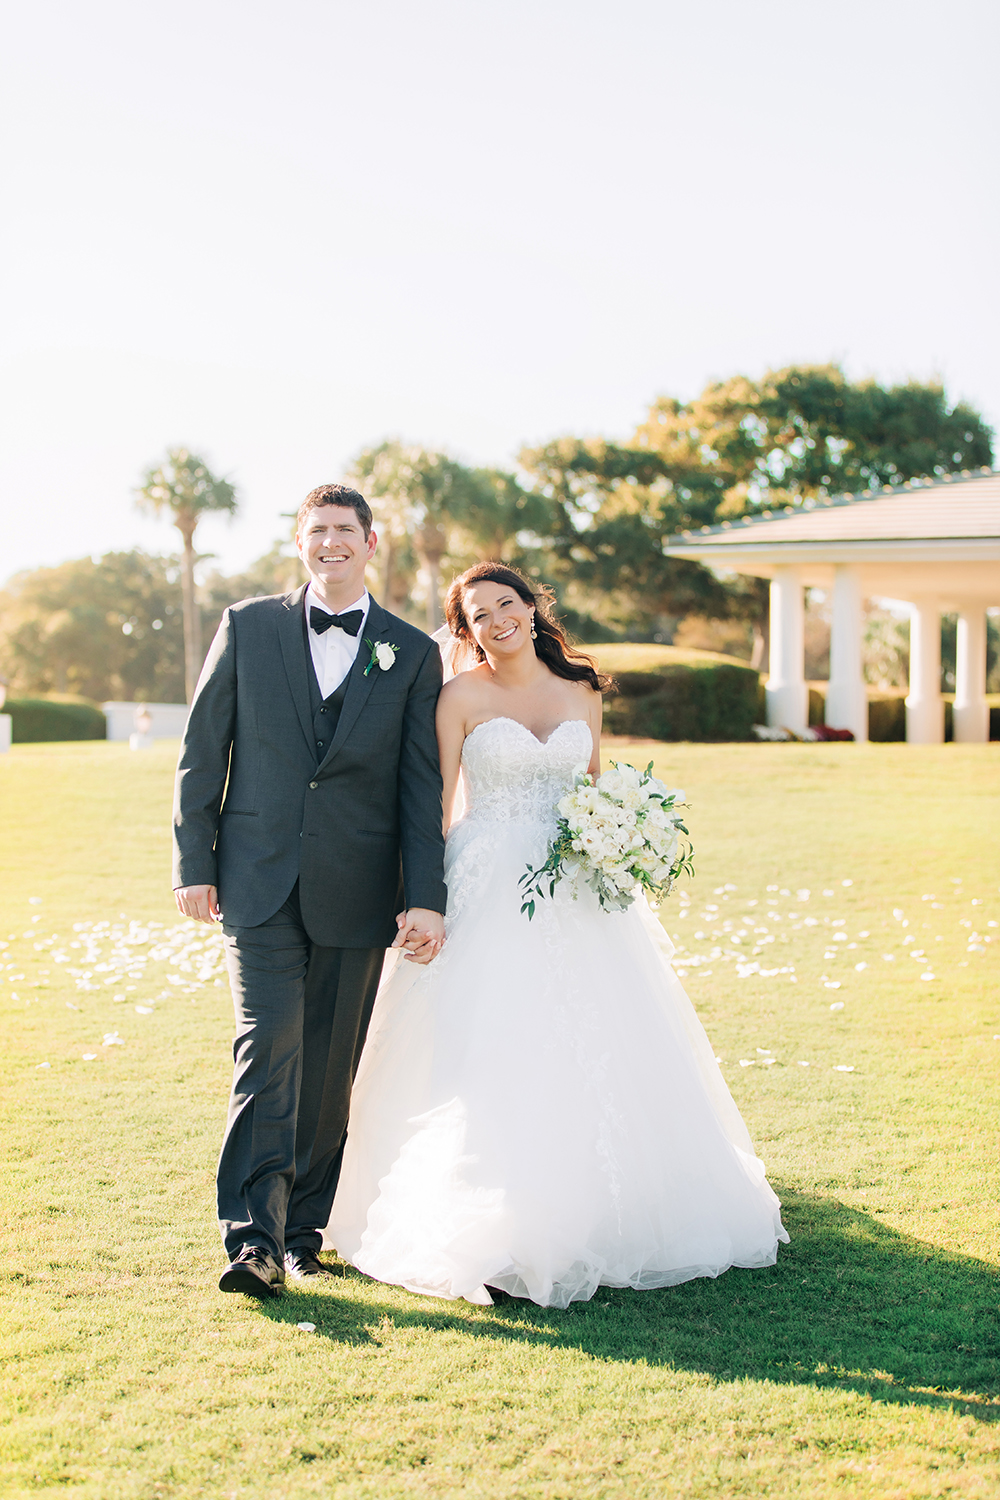 Wedding at the dunes golf and beach club